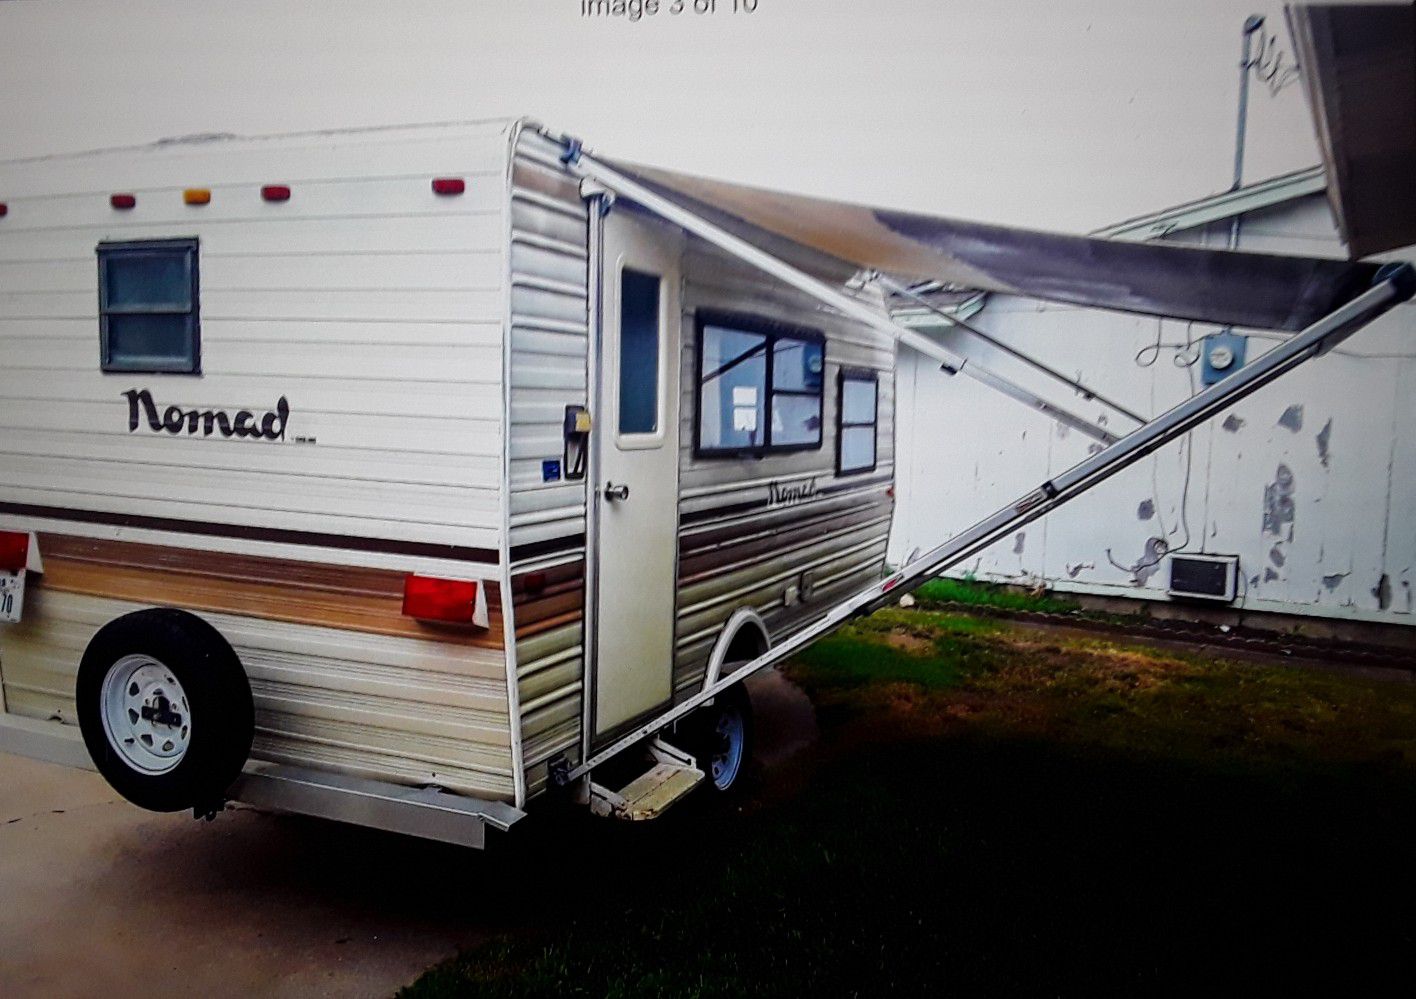 1986 Nomad 14' Travel Trailer - Great Condition